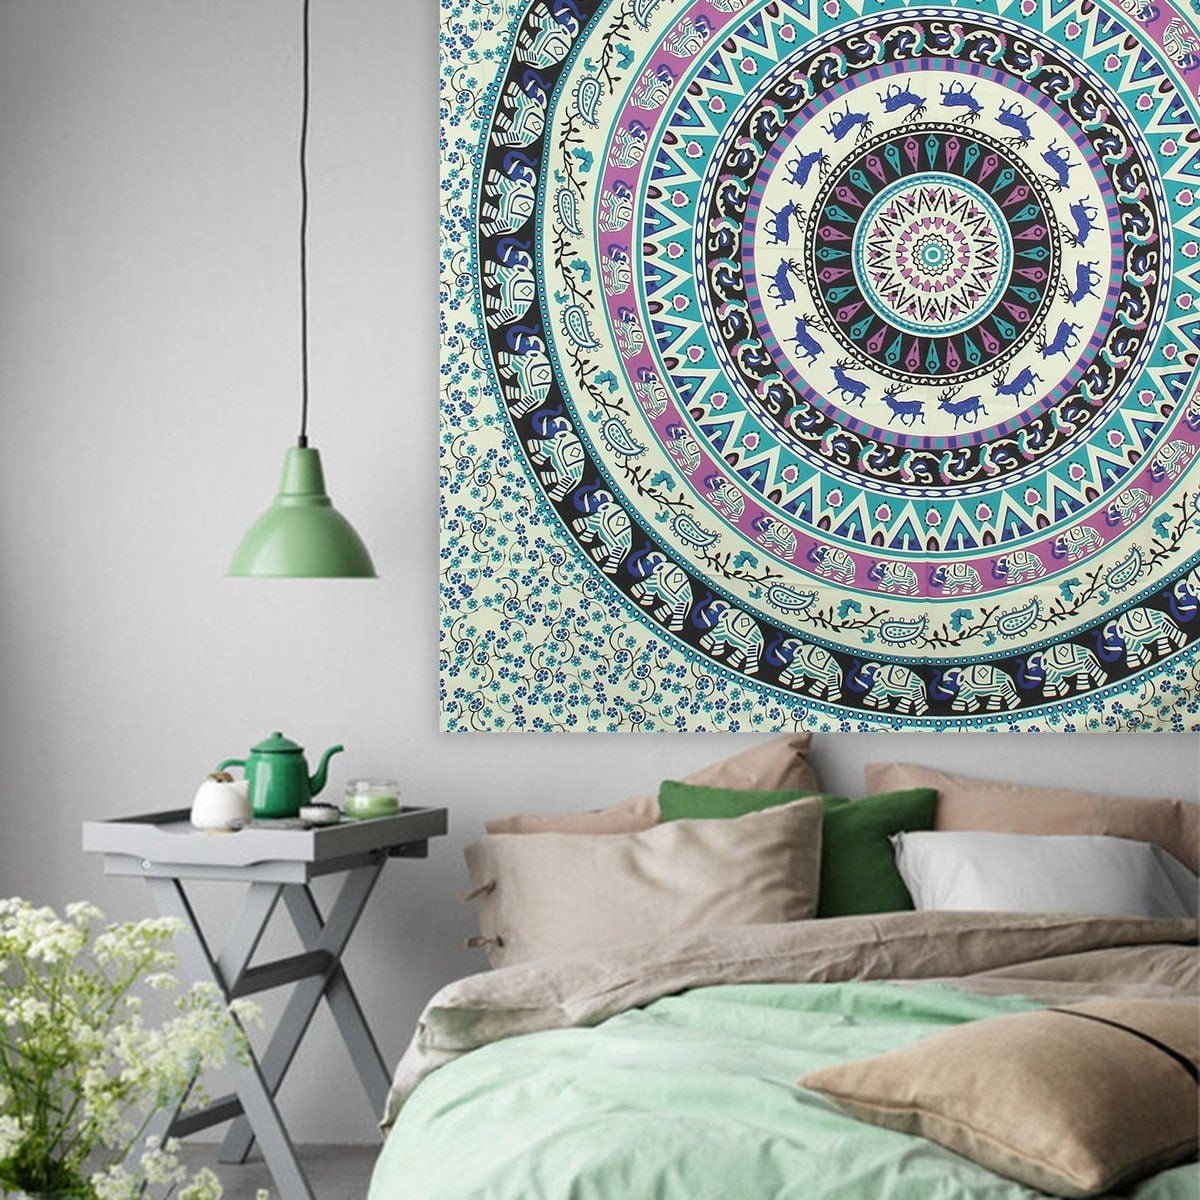 Hippie Deer Mandala Tapestry Wall Hanging Blue Bohemian Art Or Indian Ombre Hippy Bedding Bedspread Set For Bedroom College Dorm Room Accessories Or